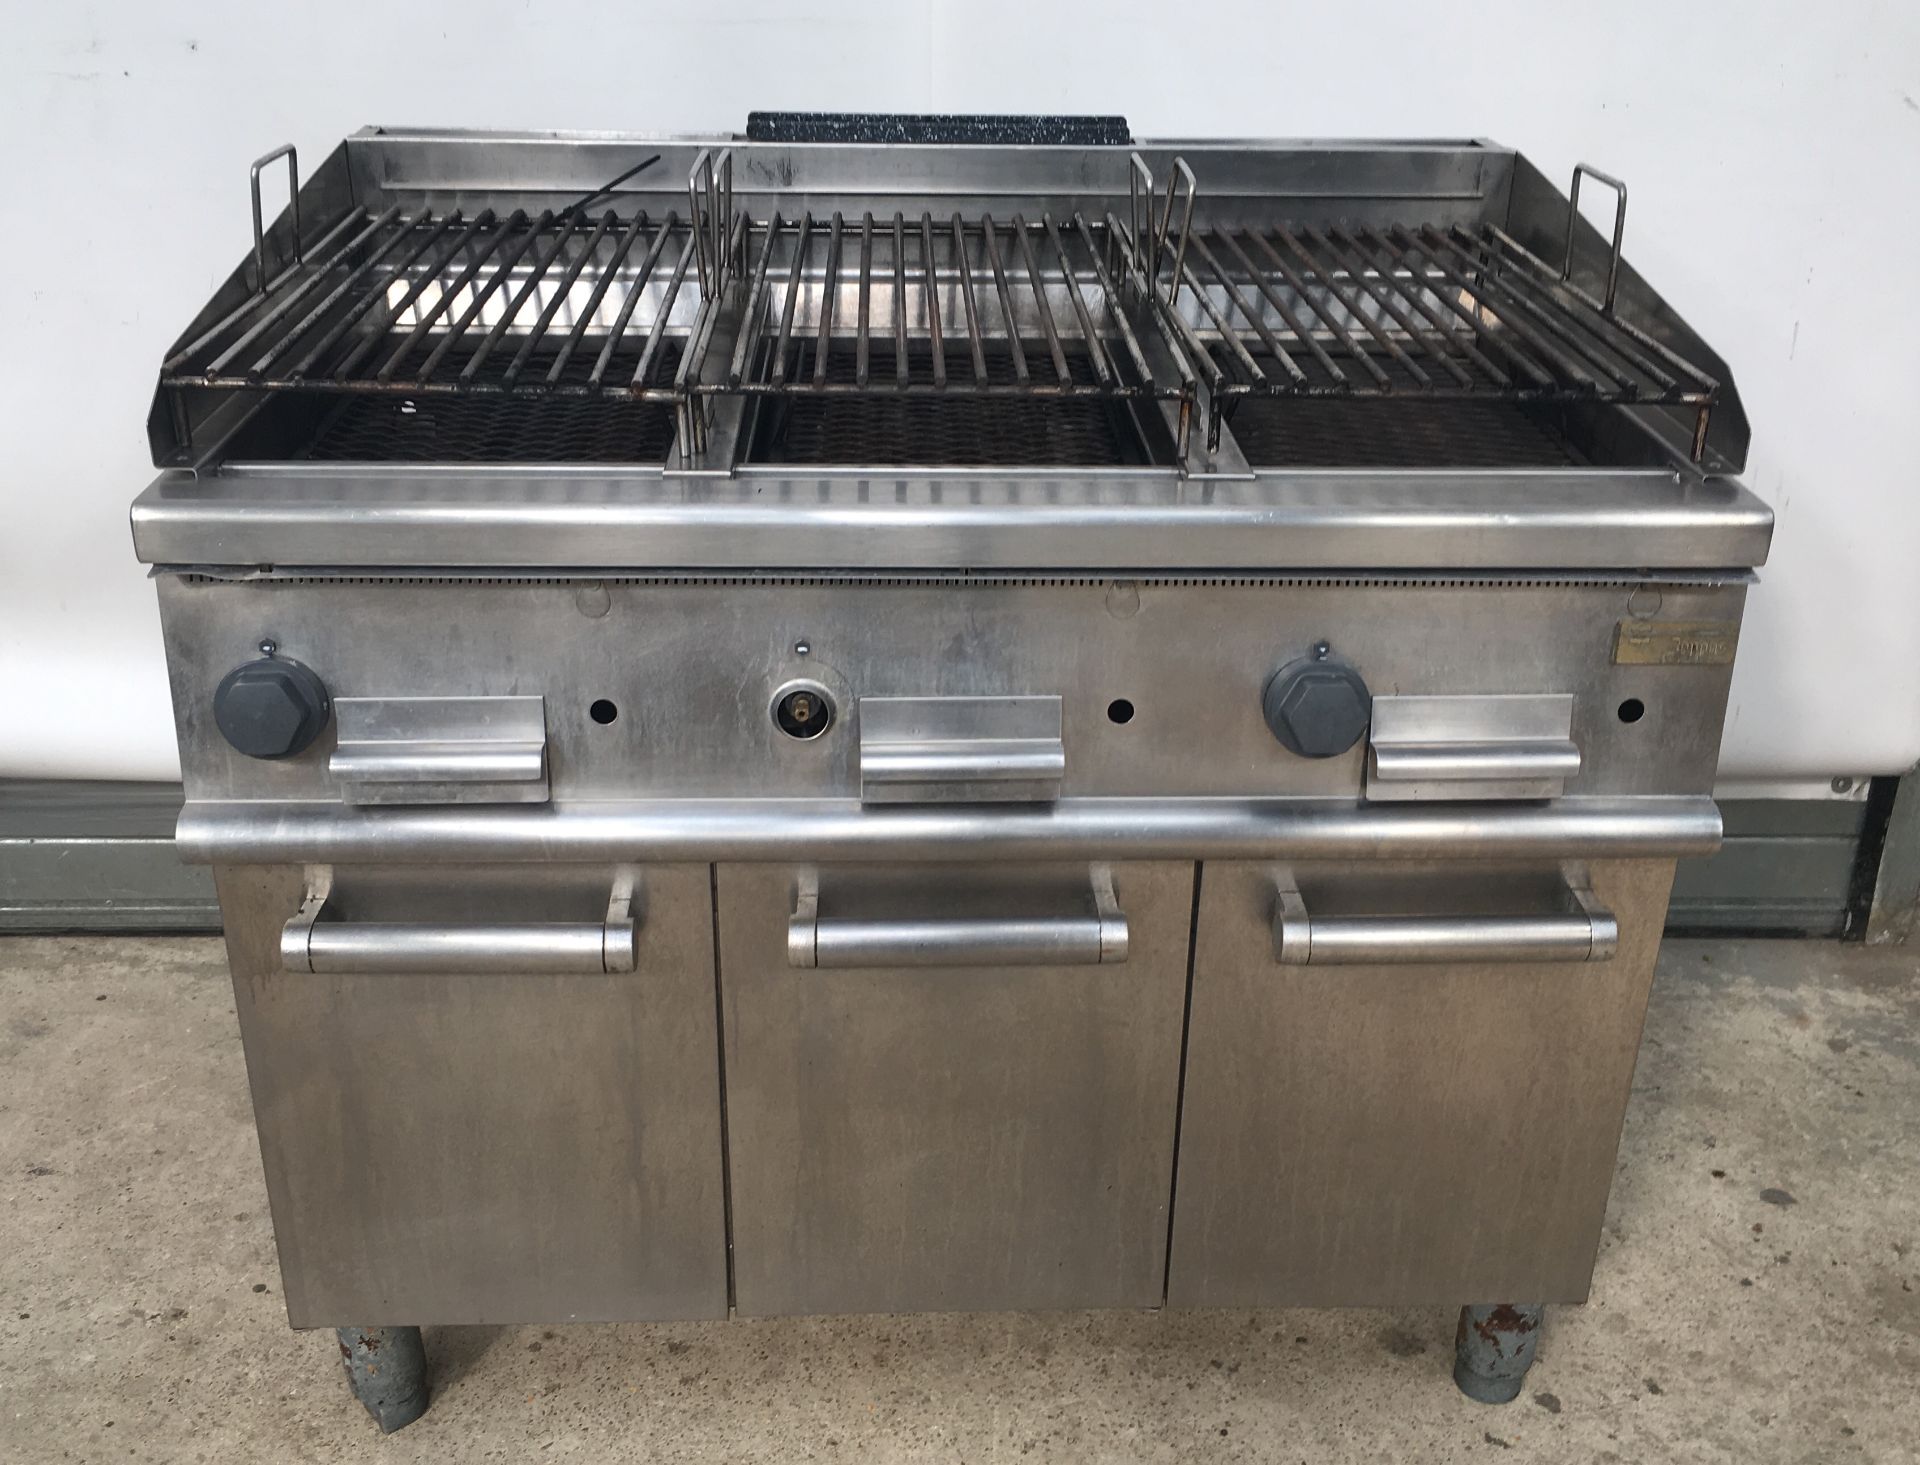 Boppas LPG Griddle This stainless steel griddle is LPG gas and has 3 griddles on top. Perfect for